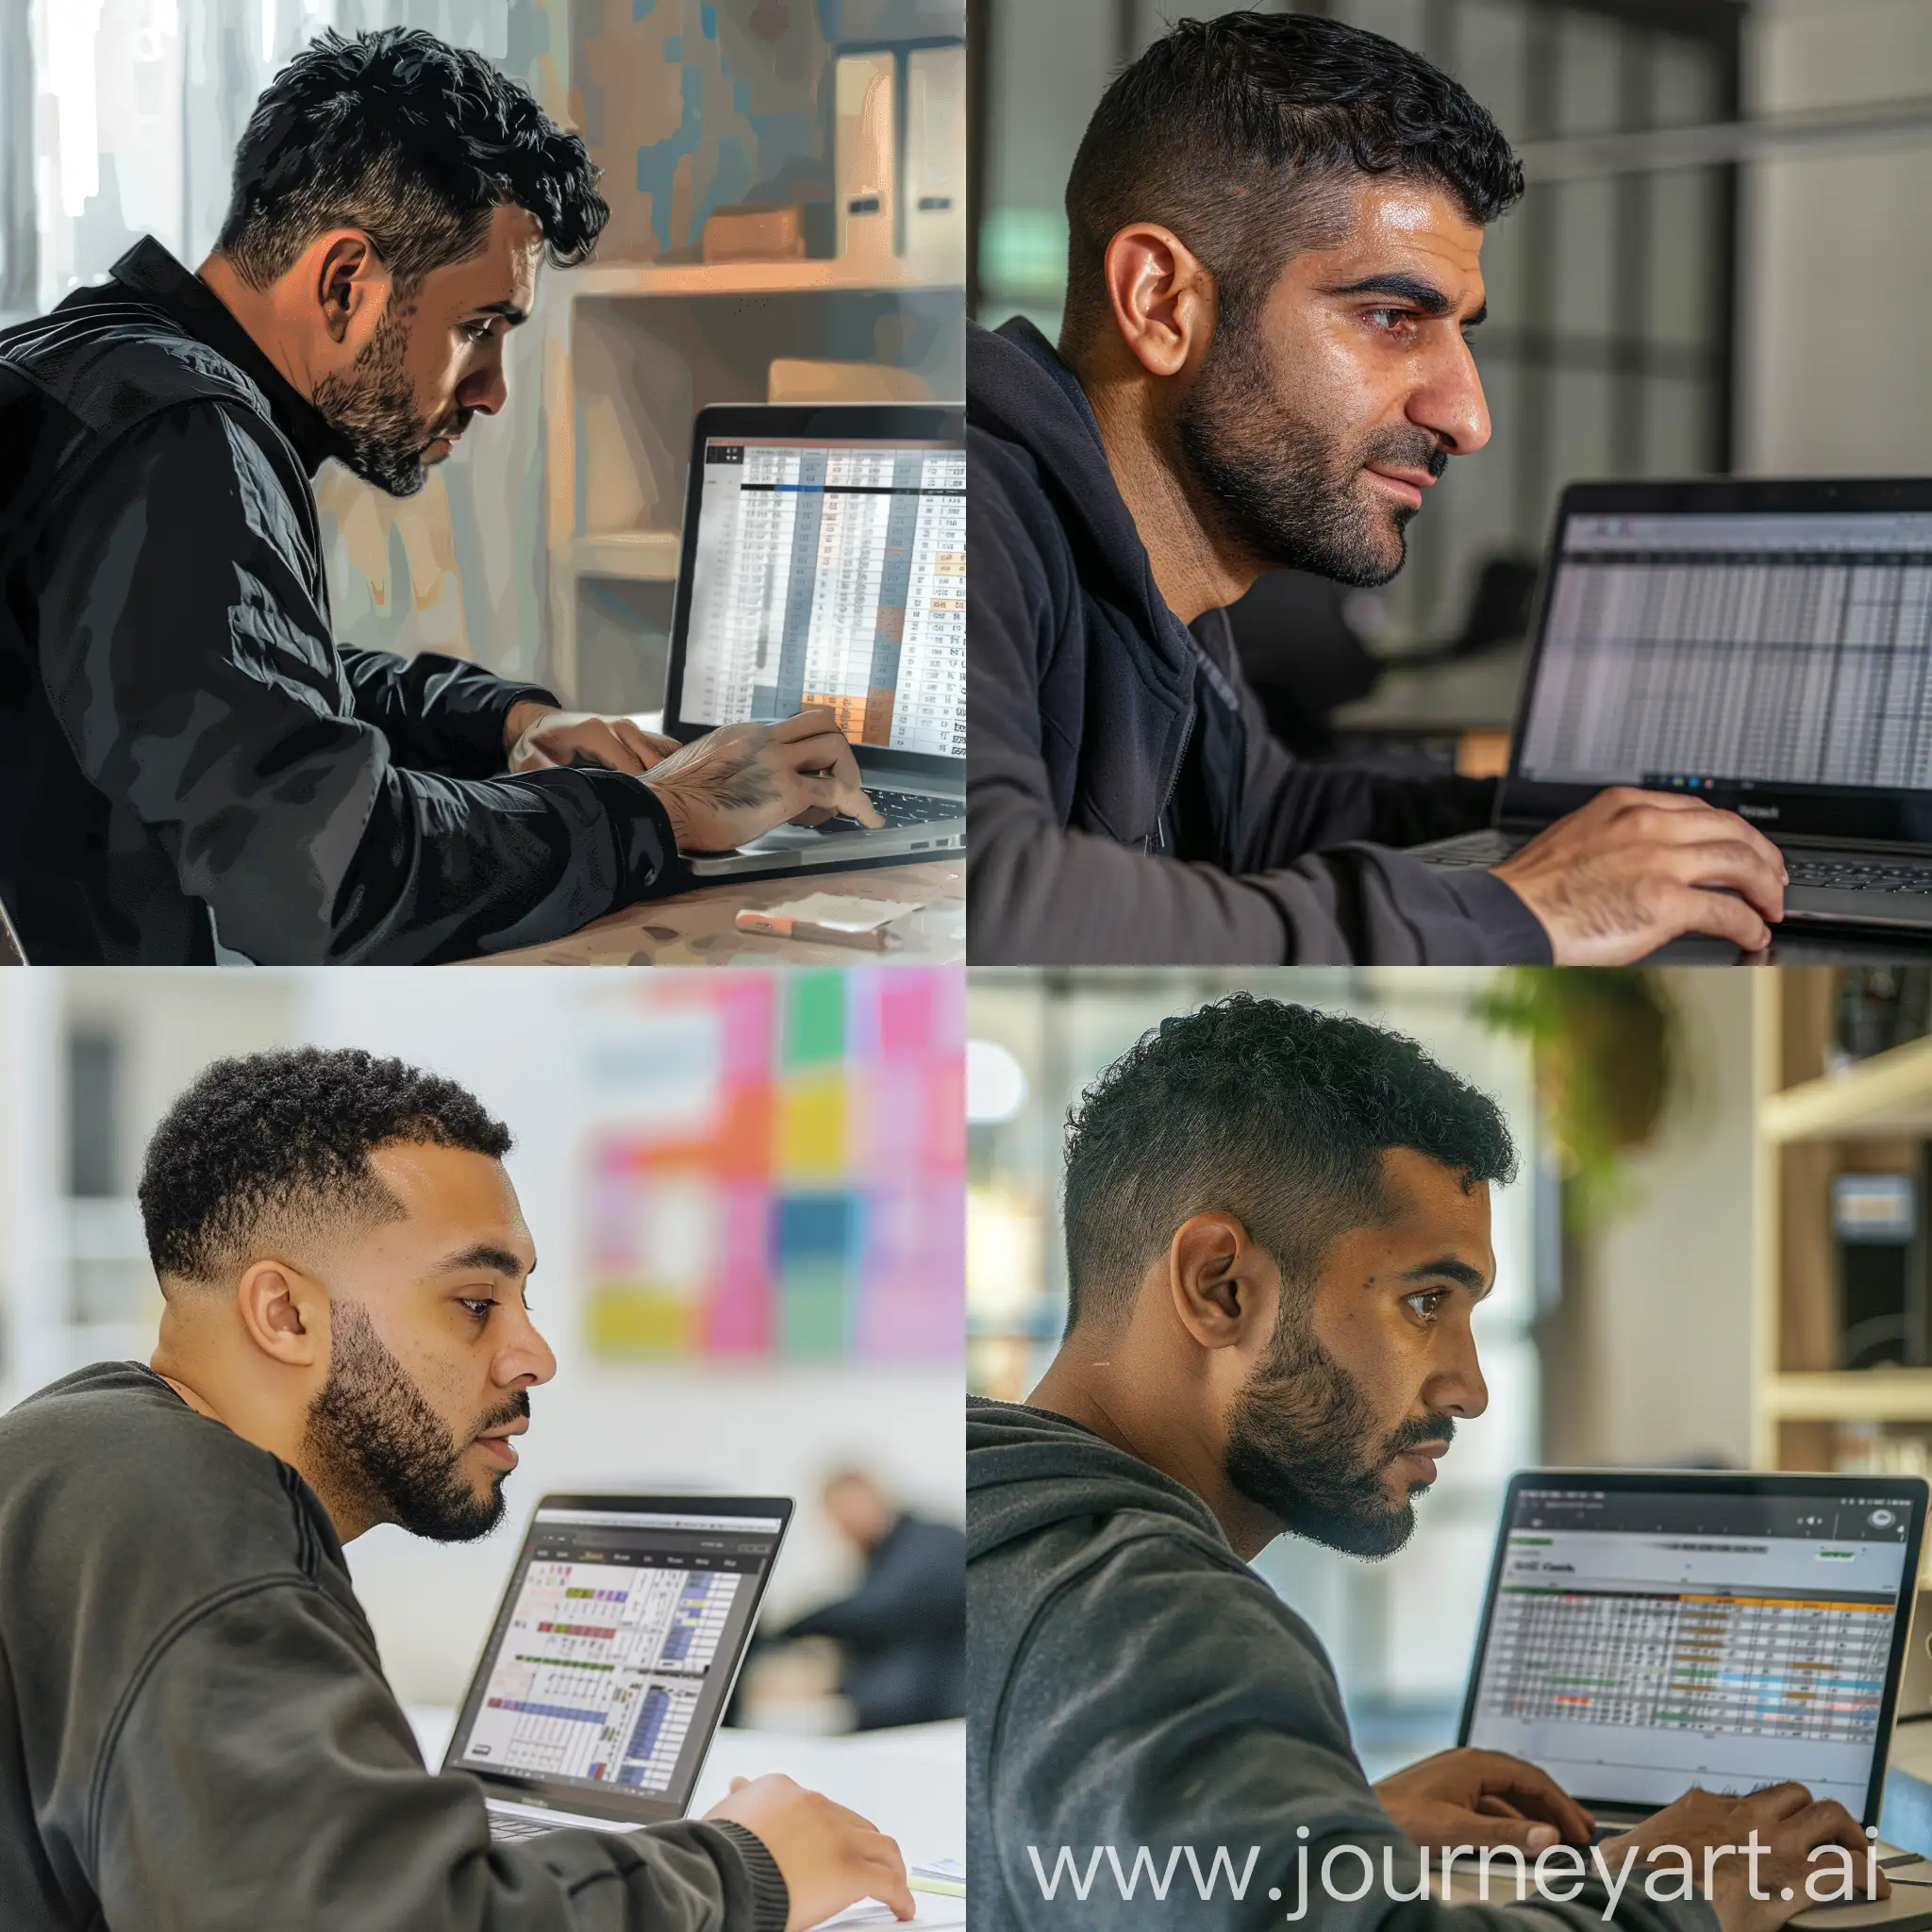 Focused-Professional-Man-with-Short-Black-Hair-and-Beard-Working-on-Spreadsheet-in-Office